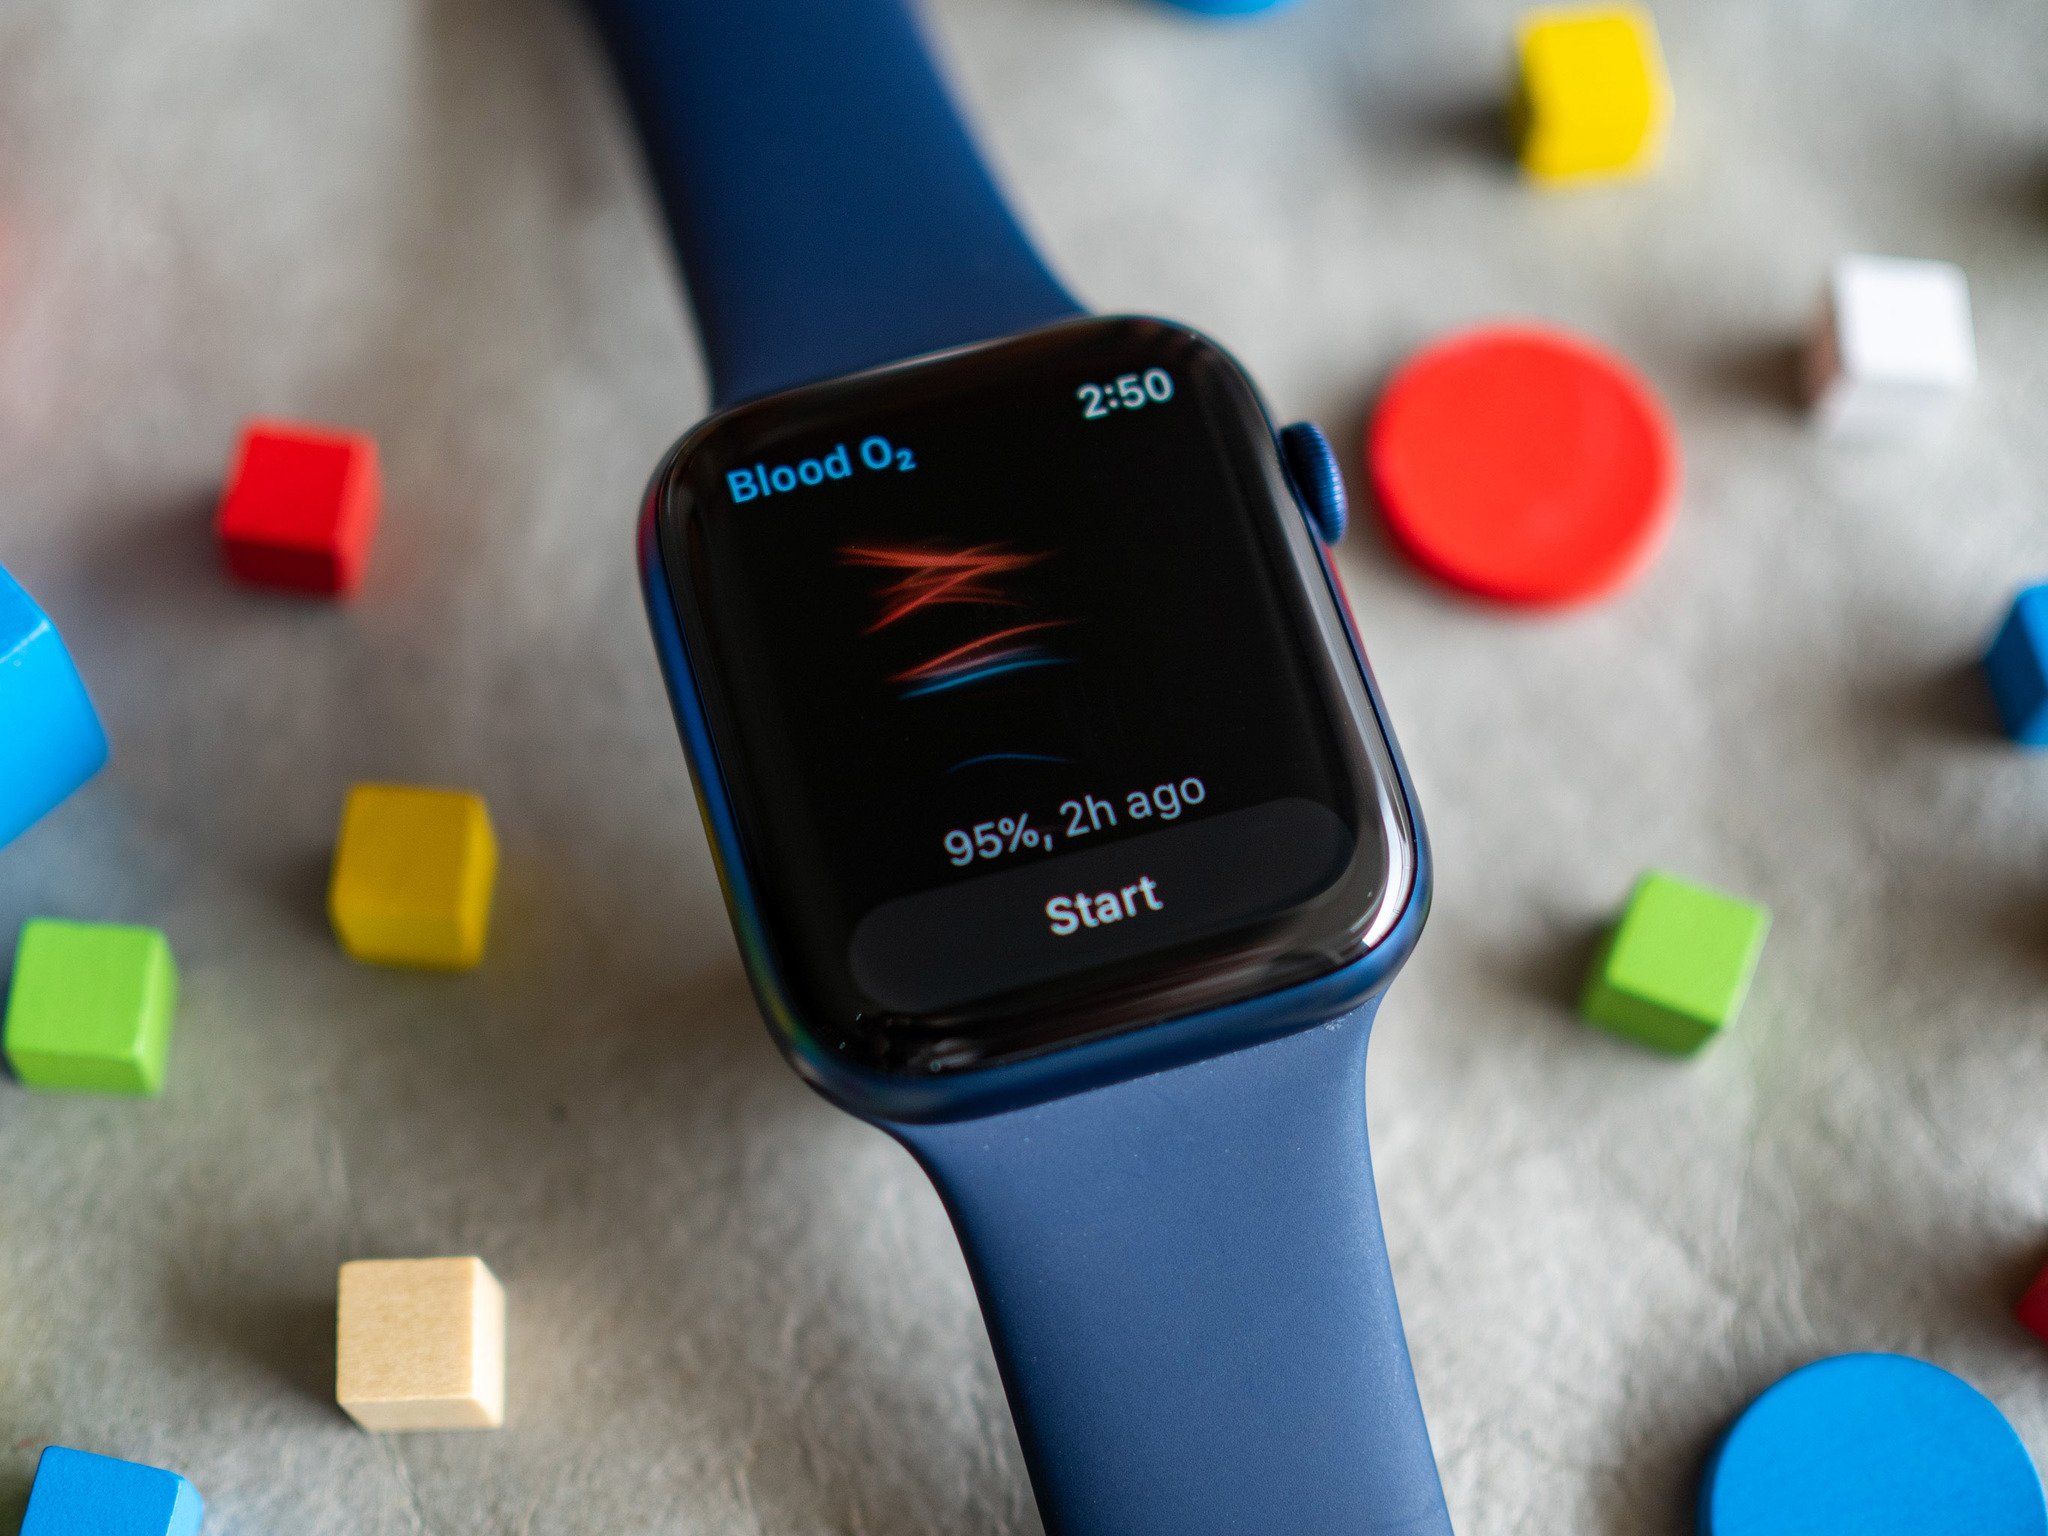 Apple Watch Series 6 review